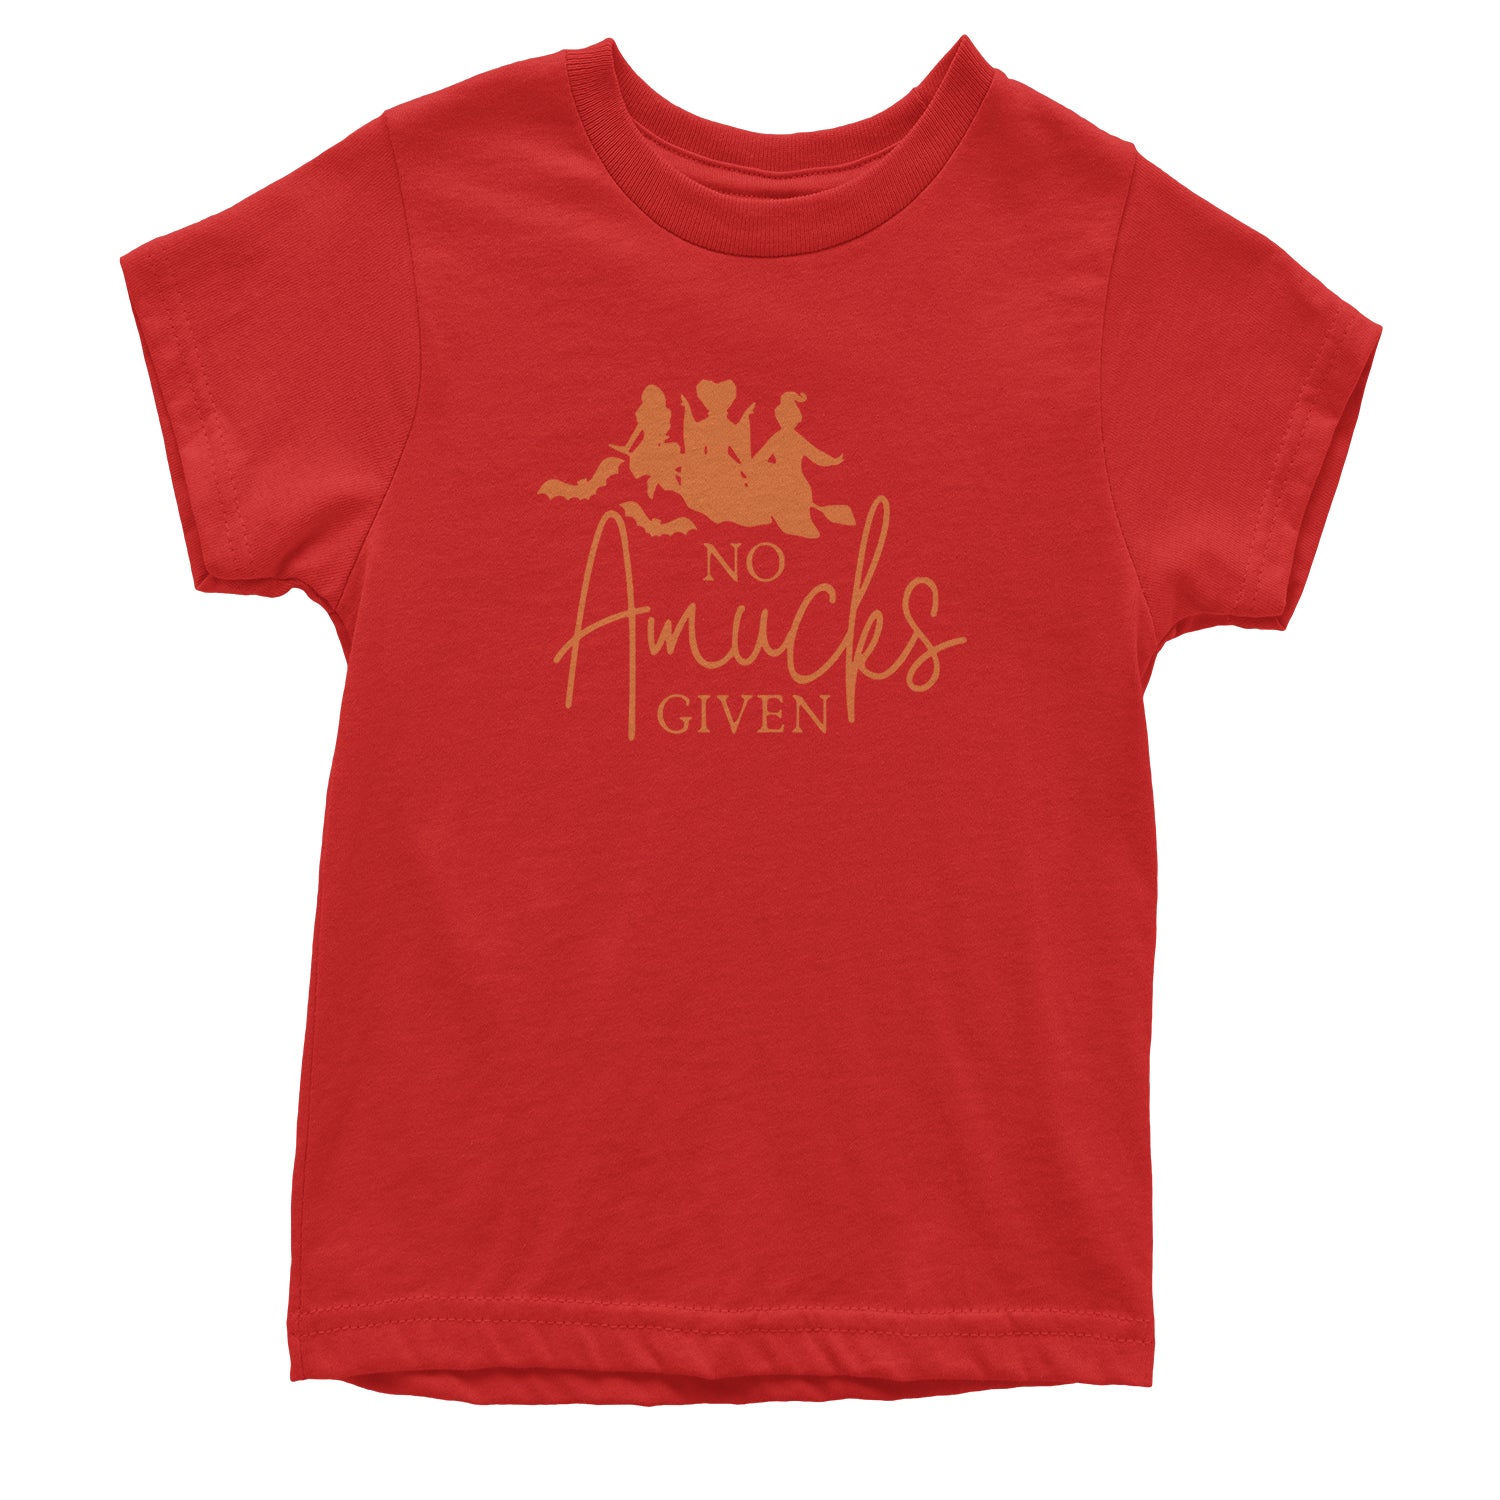 No Amucks Given Hocus Pocus Youth T-shirt descendants, enchanted, eve, hallows, hocus, or, pocus, sanderson, sisters, treat, trick, witches by Expression Tees